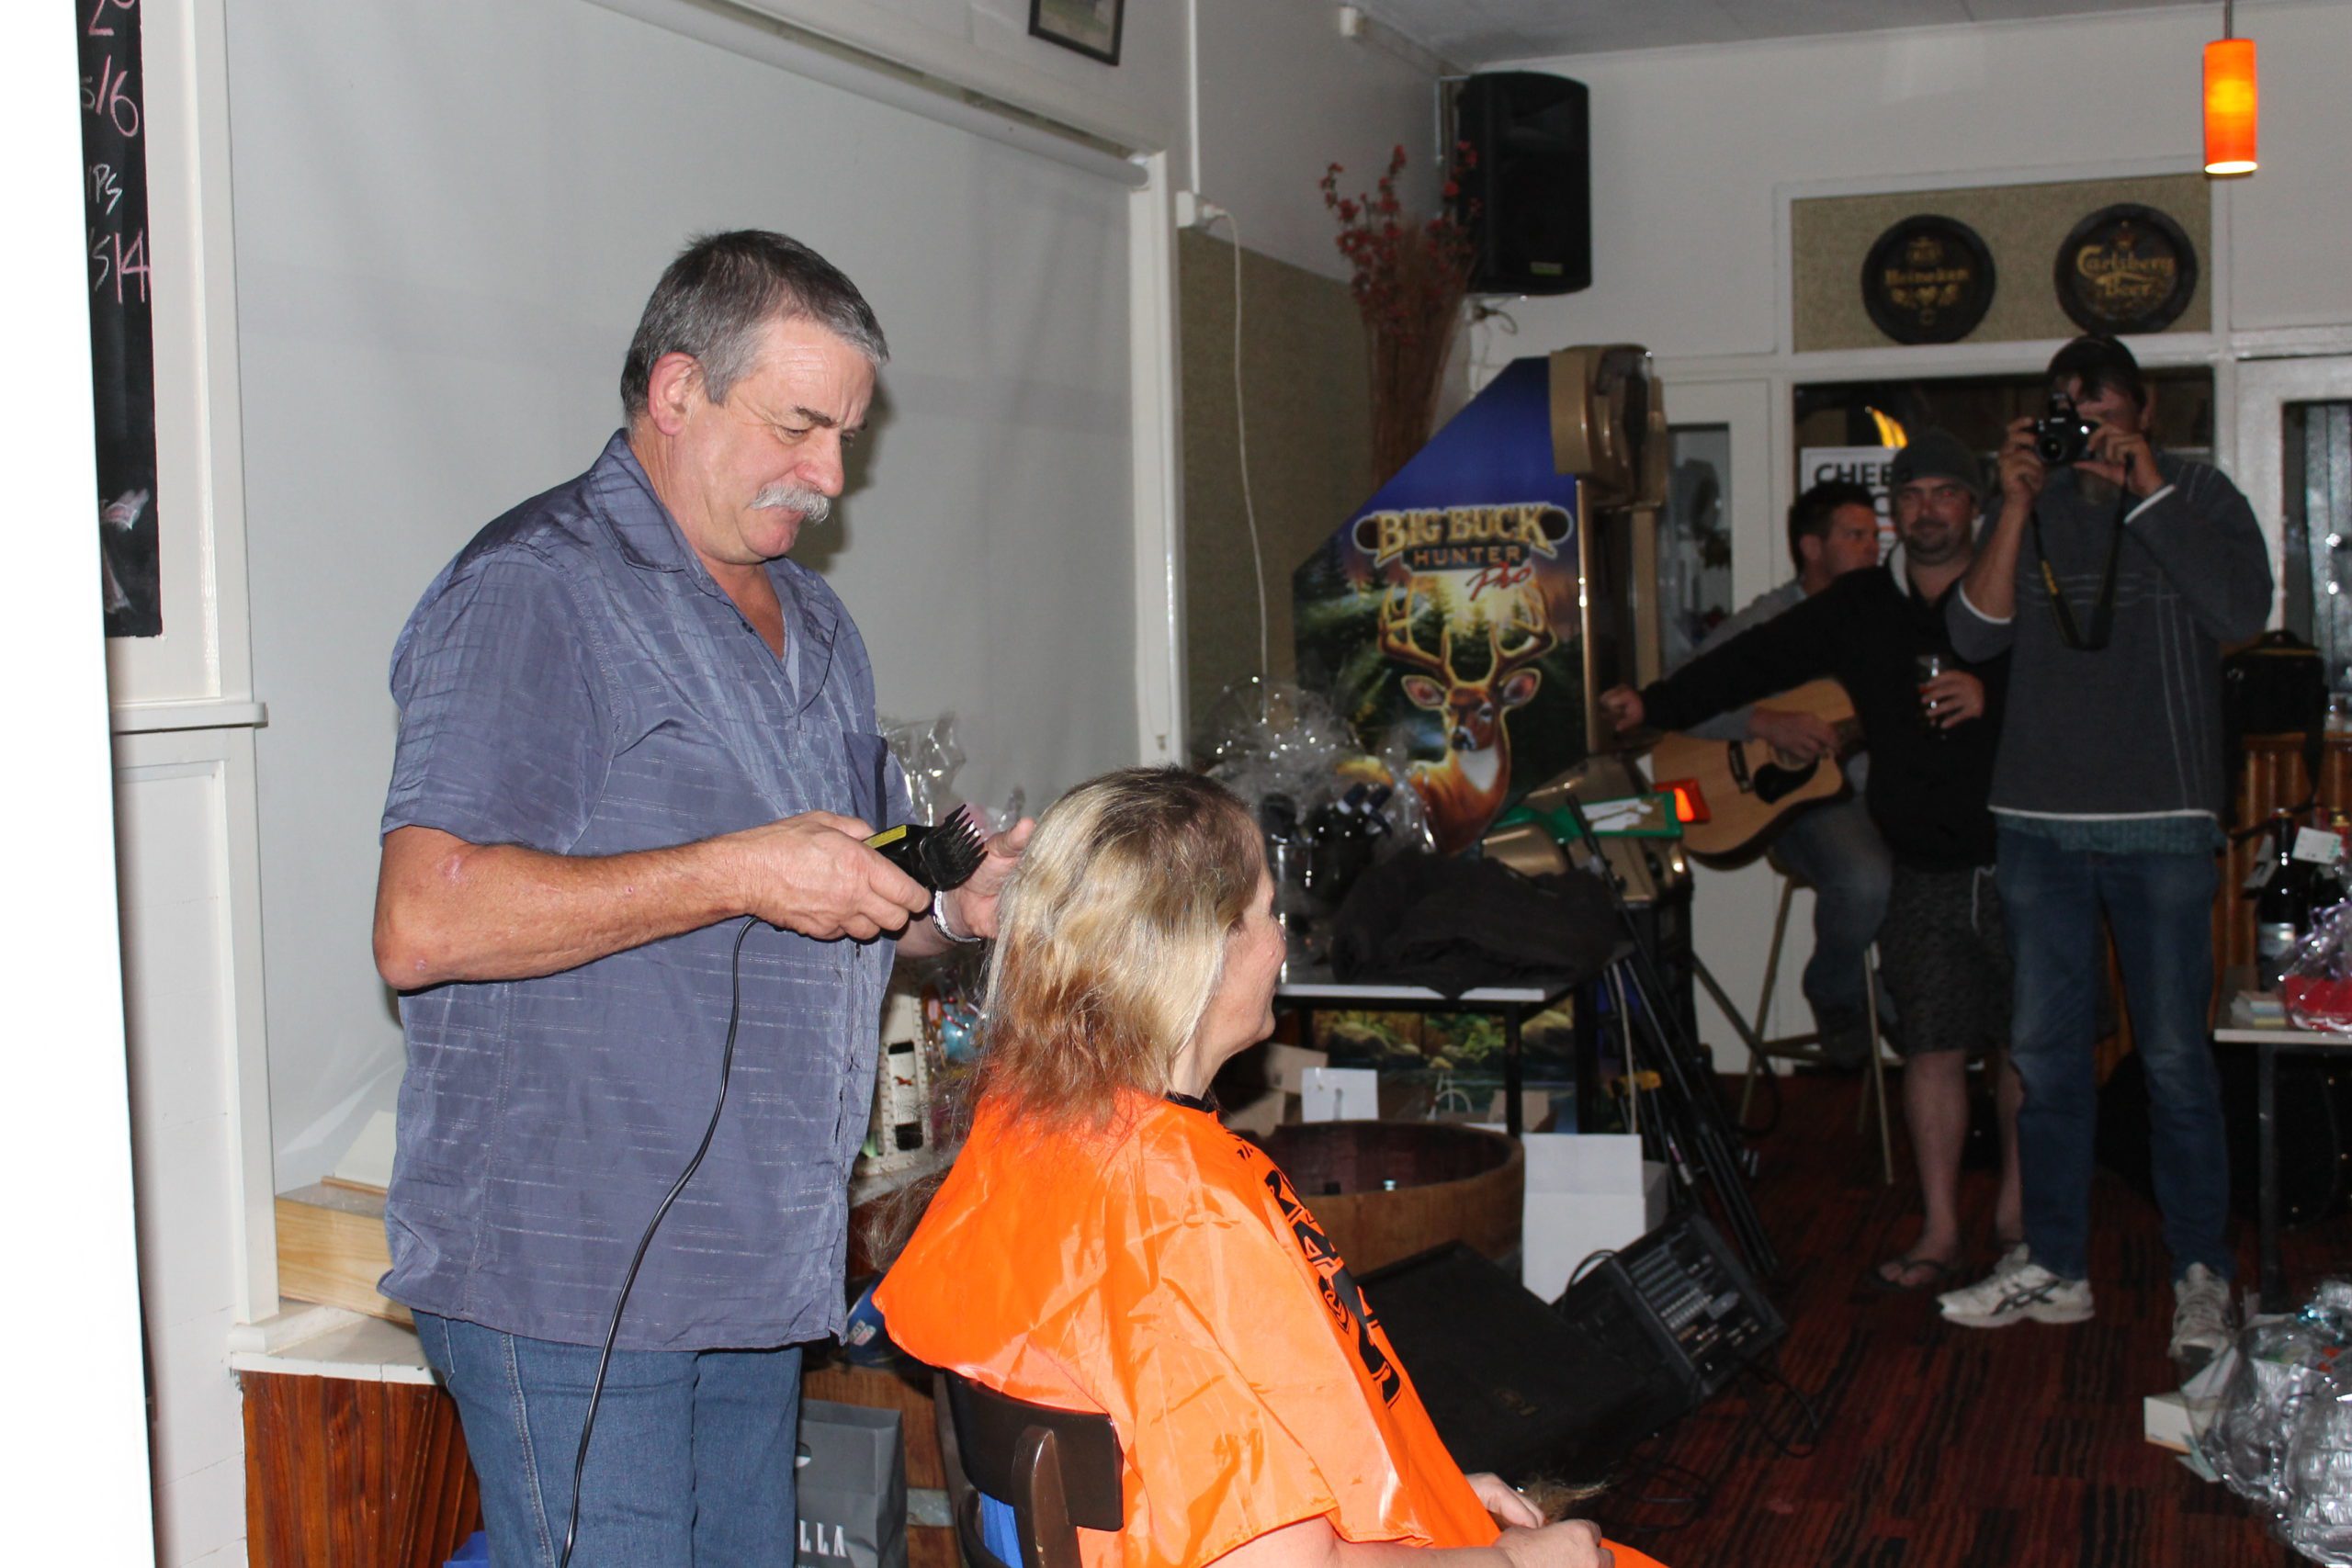 Ted shaving Leanne Pitman's hair at WGS 2013